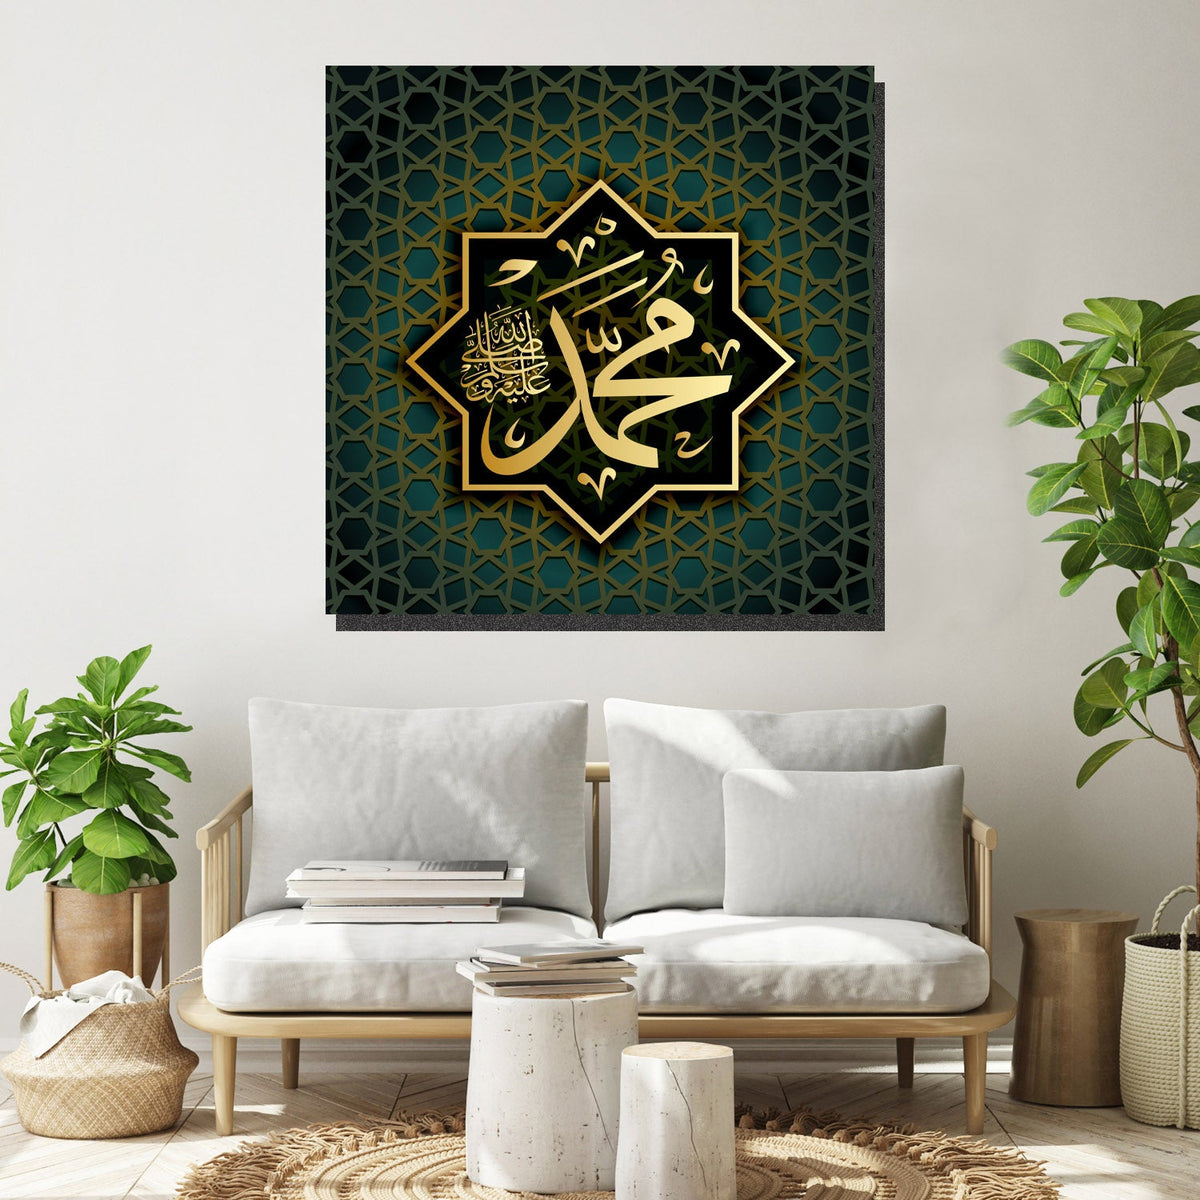 https://cdn.shopify.com/s/files/1/0387/9986/8044/products/IslamicLimitedEdition14CanvasArtprintStretched-1.jpg